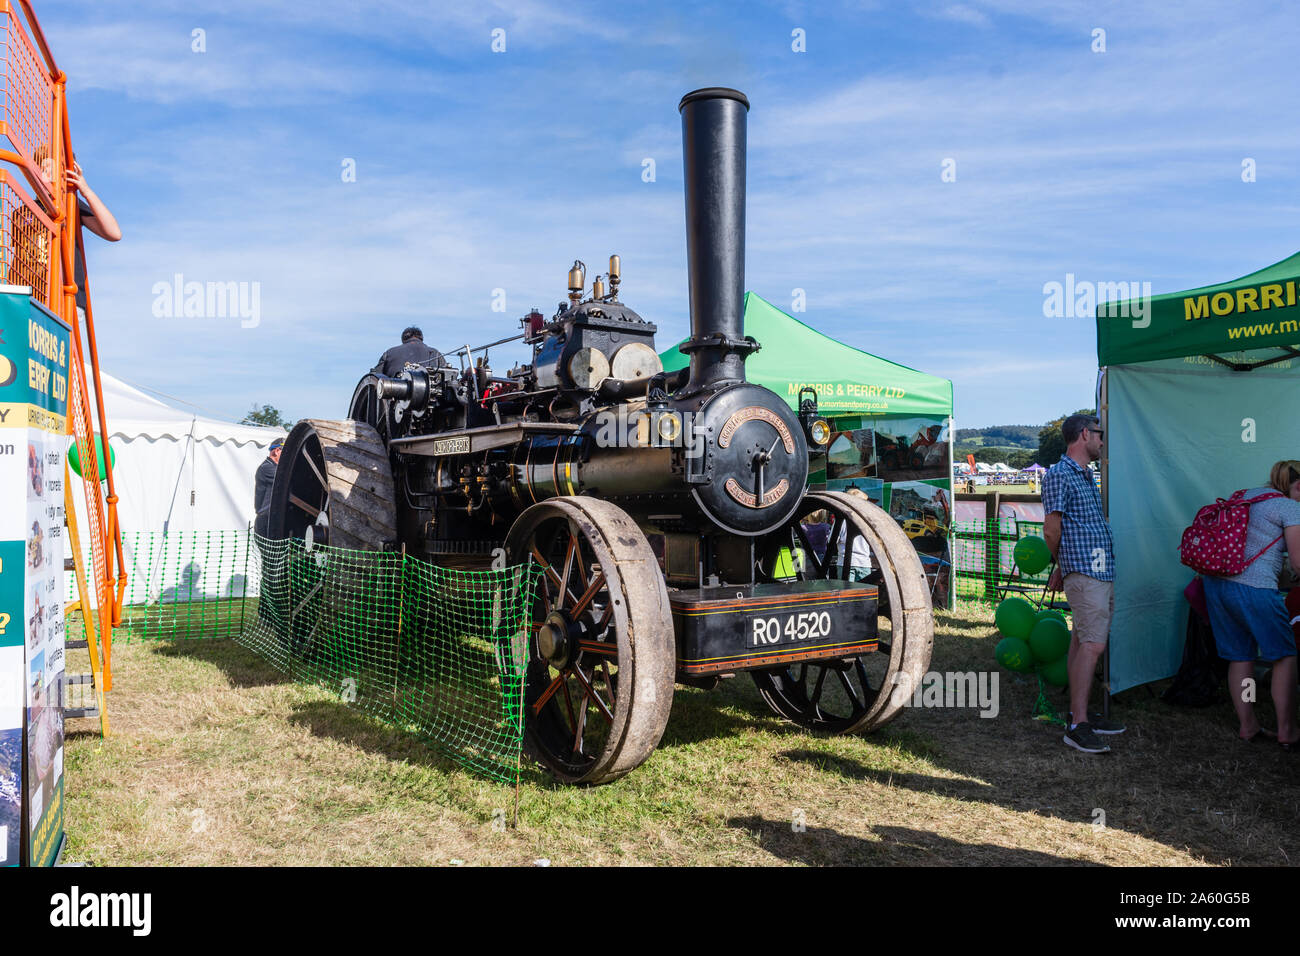 A Fowler ploughing engine named Jack of Herts, number RO 4520, on display at Frome Cheese Show 14th September 2019 Stock Photo